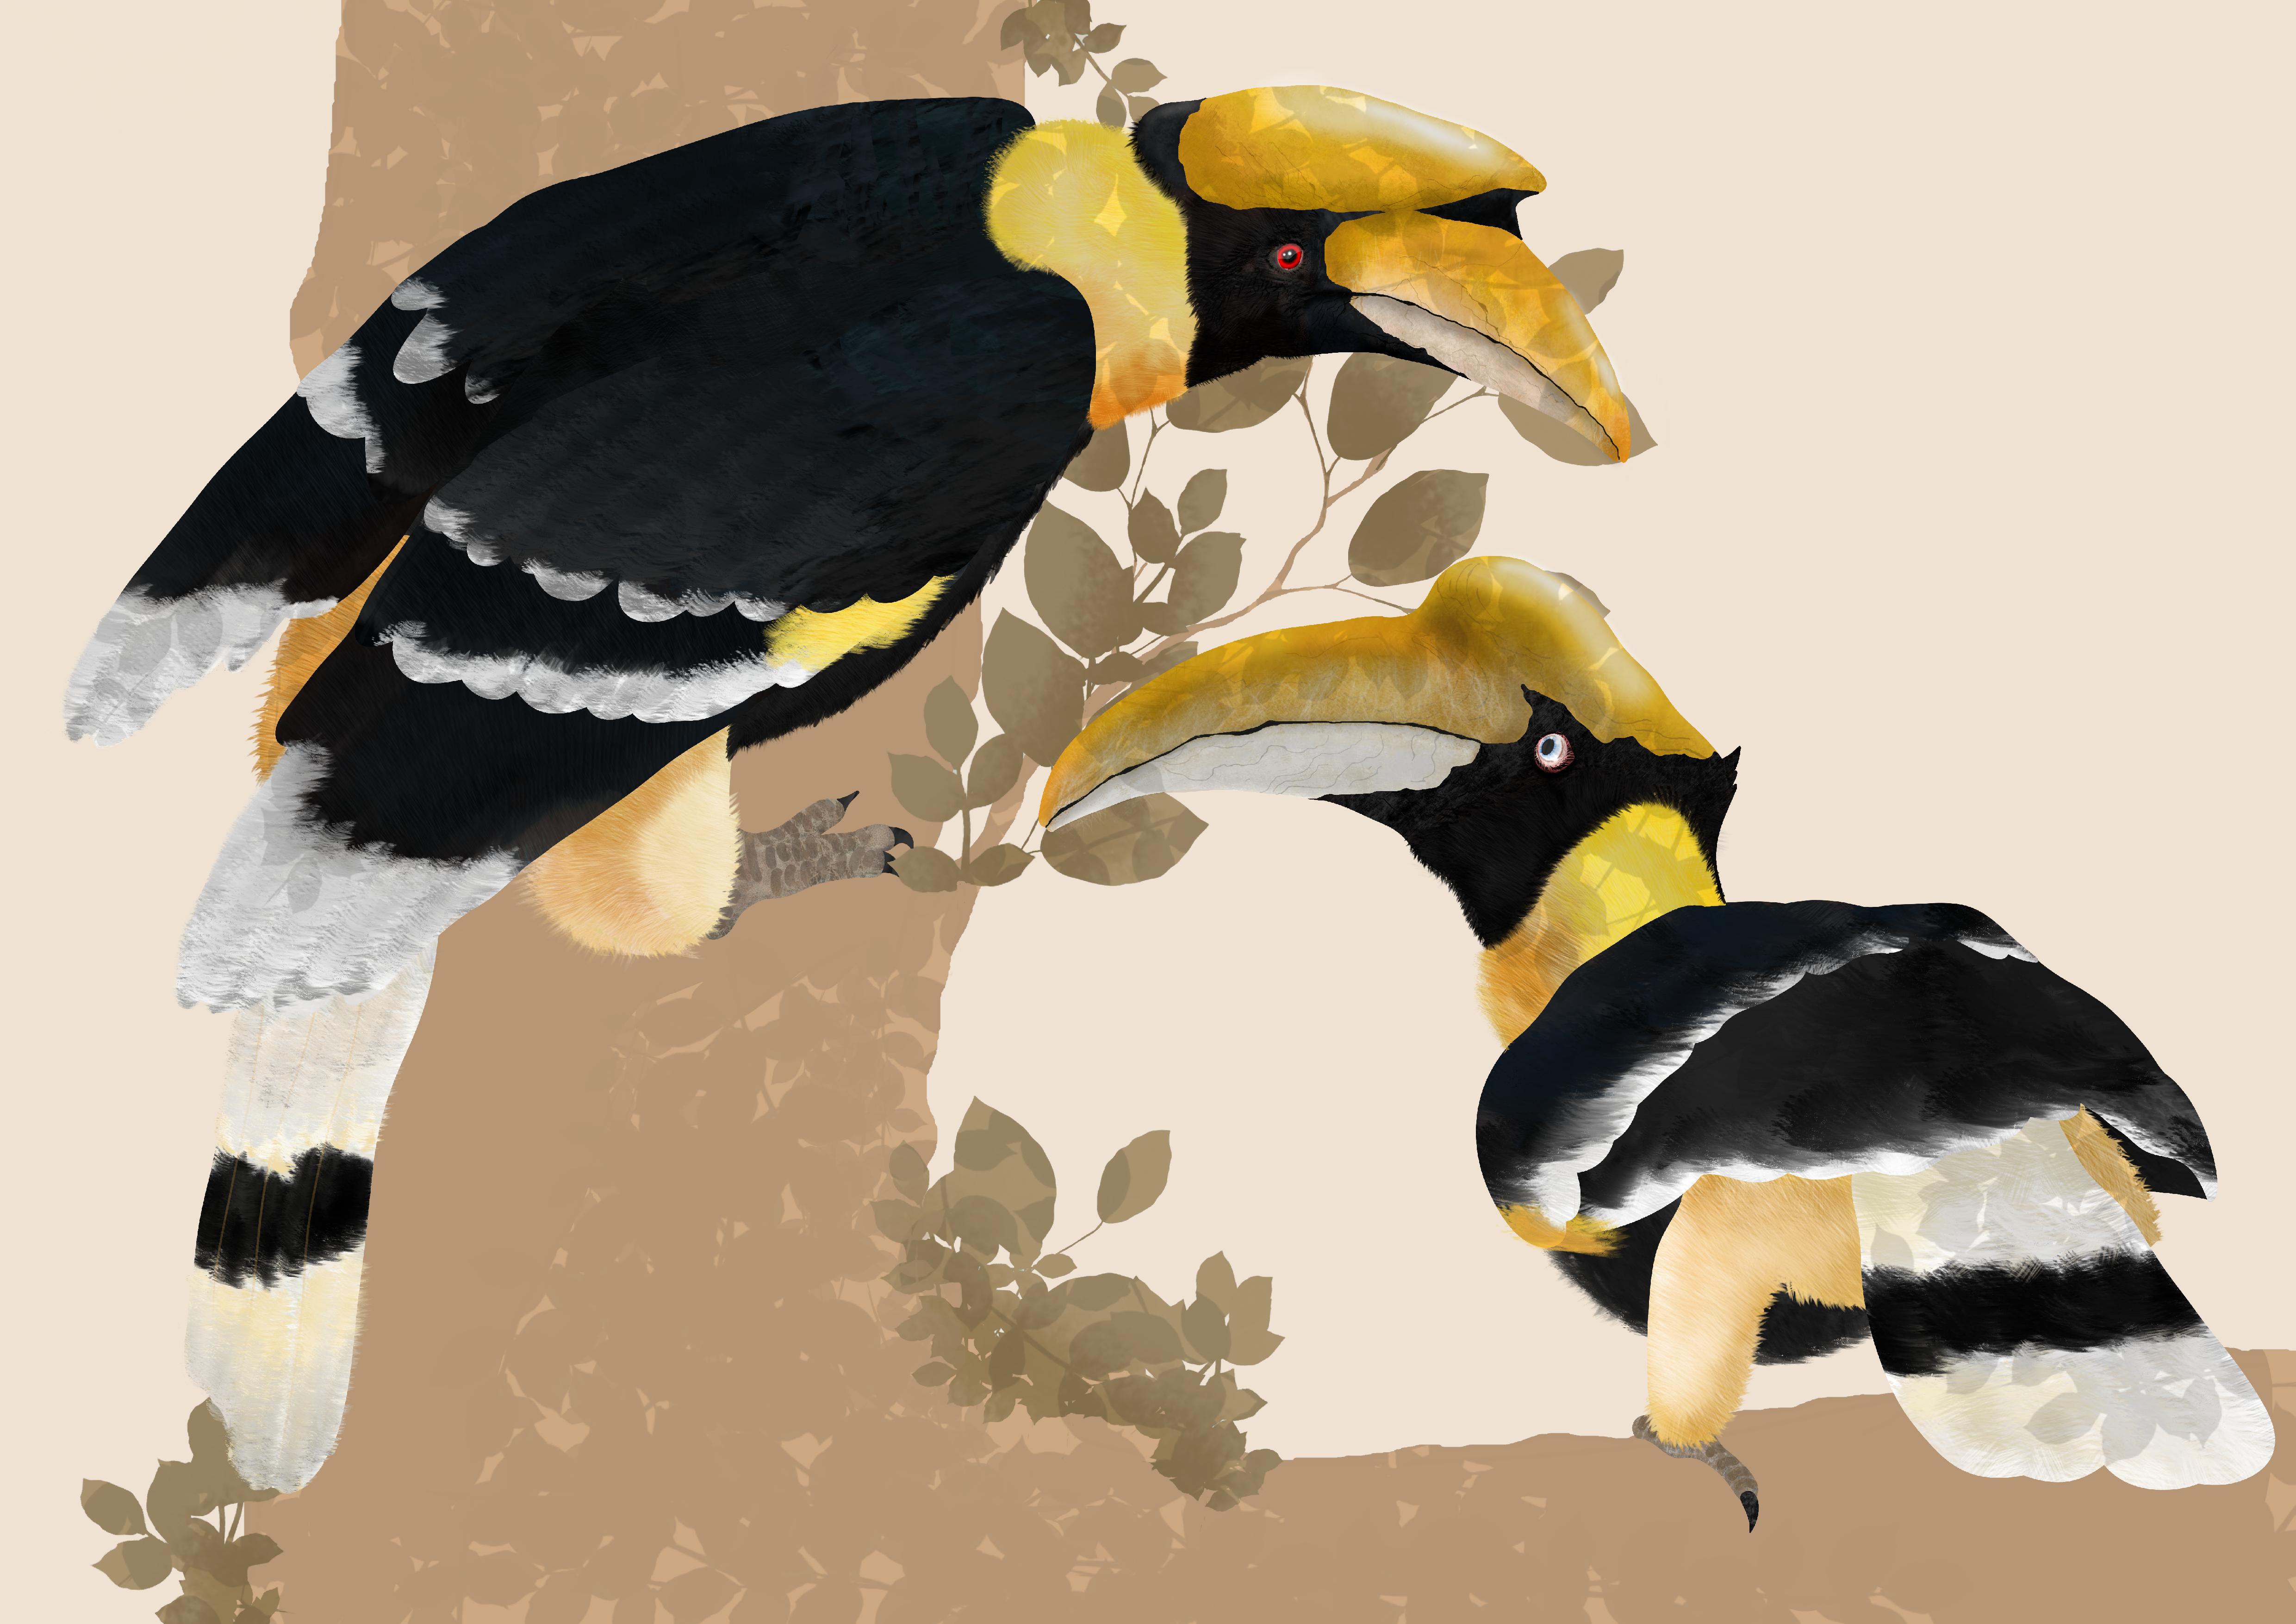 BA Illustration work by Alistair Simmonds showing an ornithology illustration of a male and female Great Indian Hornbill